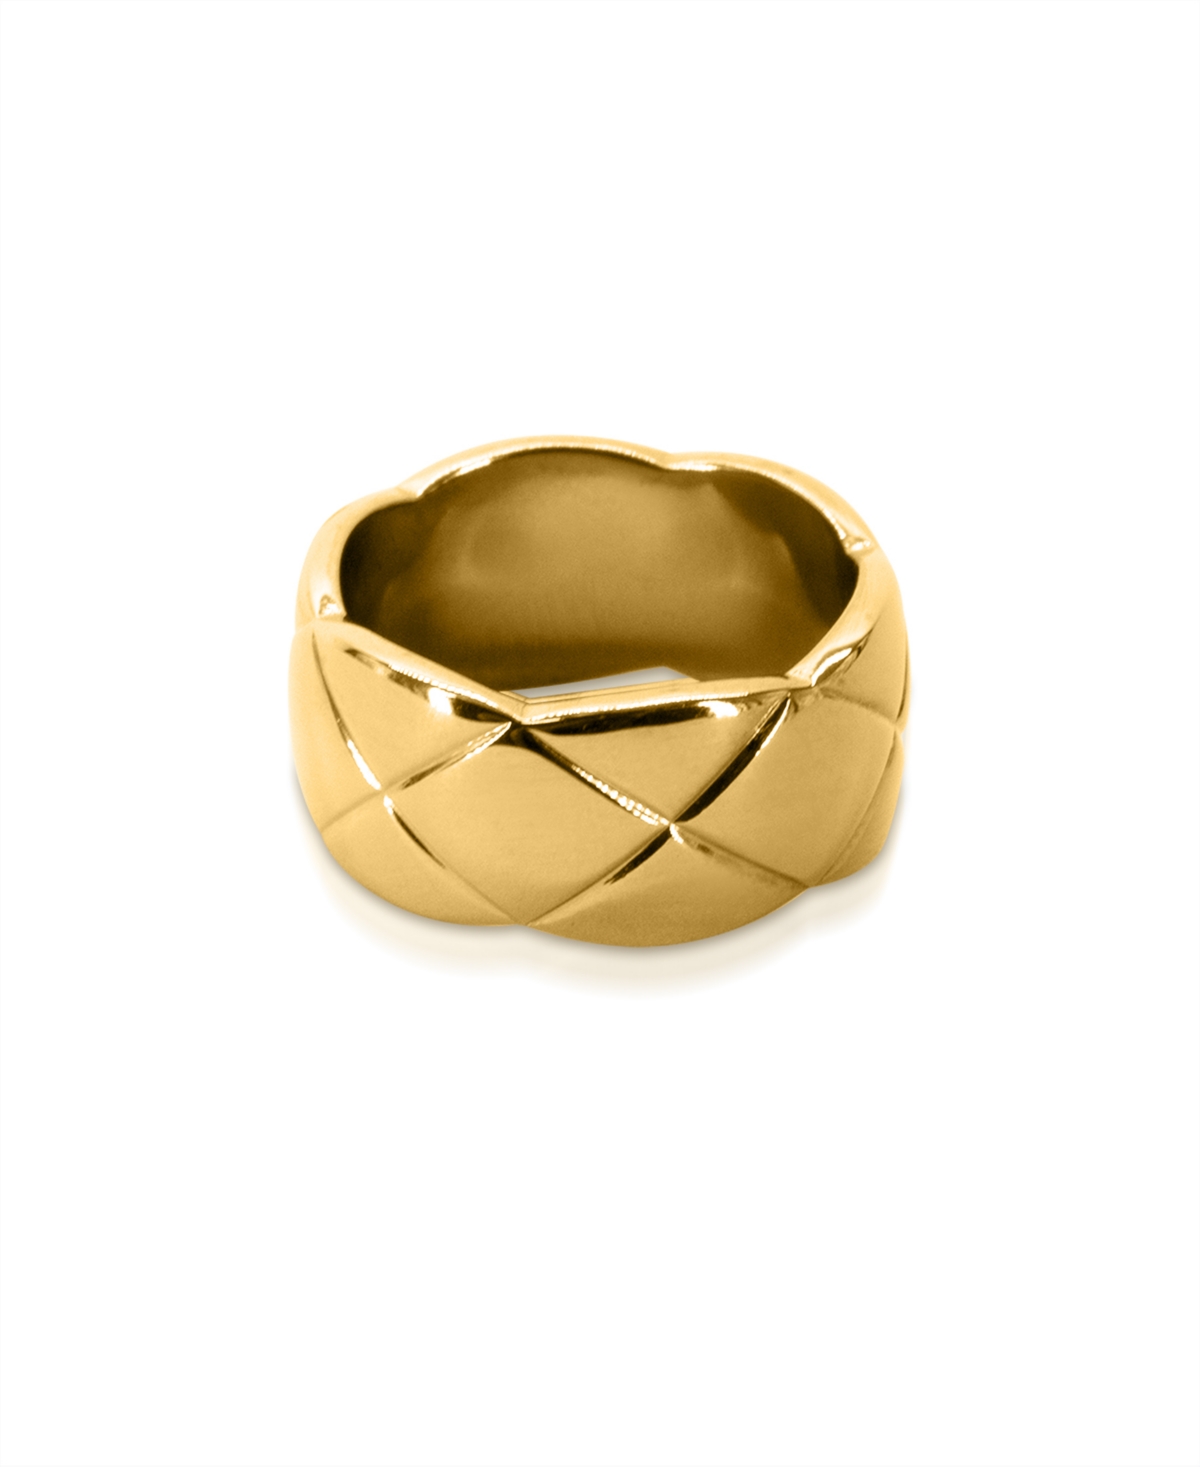 Nneoma 1/2" Ring in 18K Gold- Plated Brass - Gold Tone